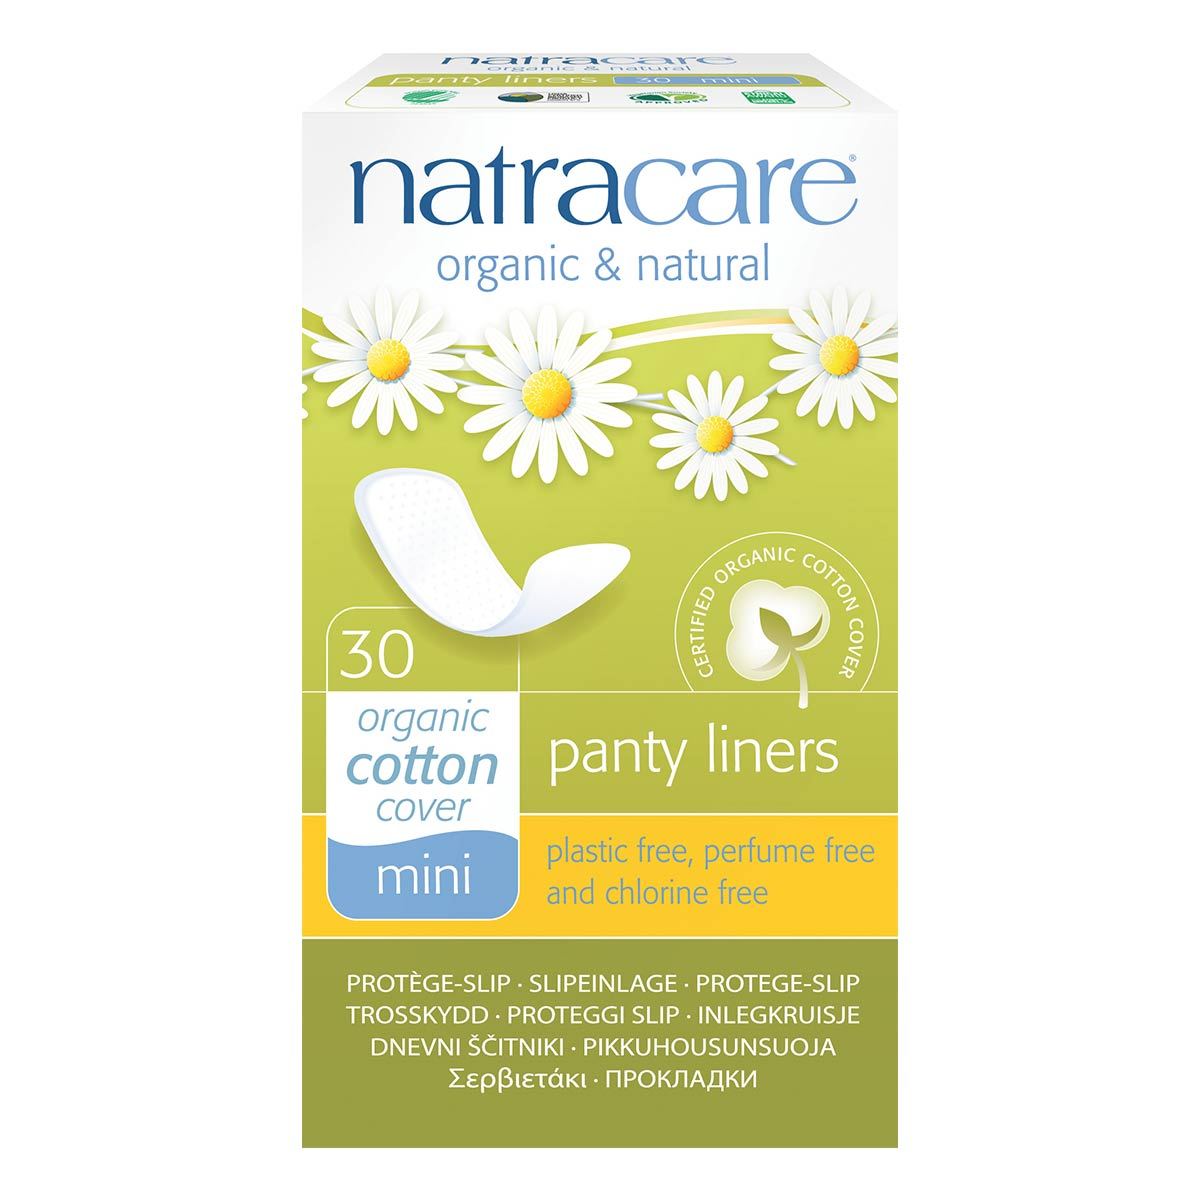 Primary image of Mini Organic Cotton Panty Liners